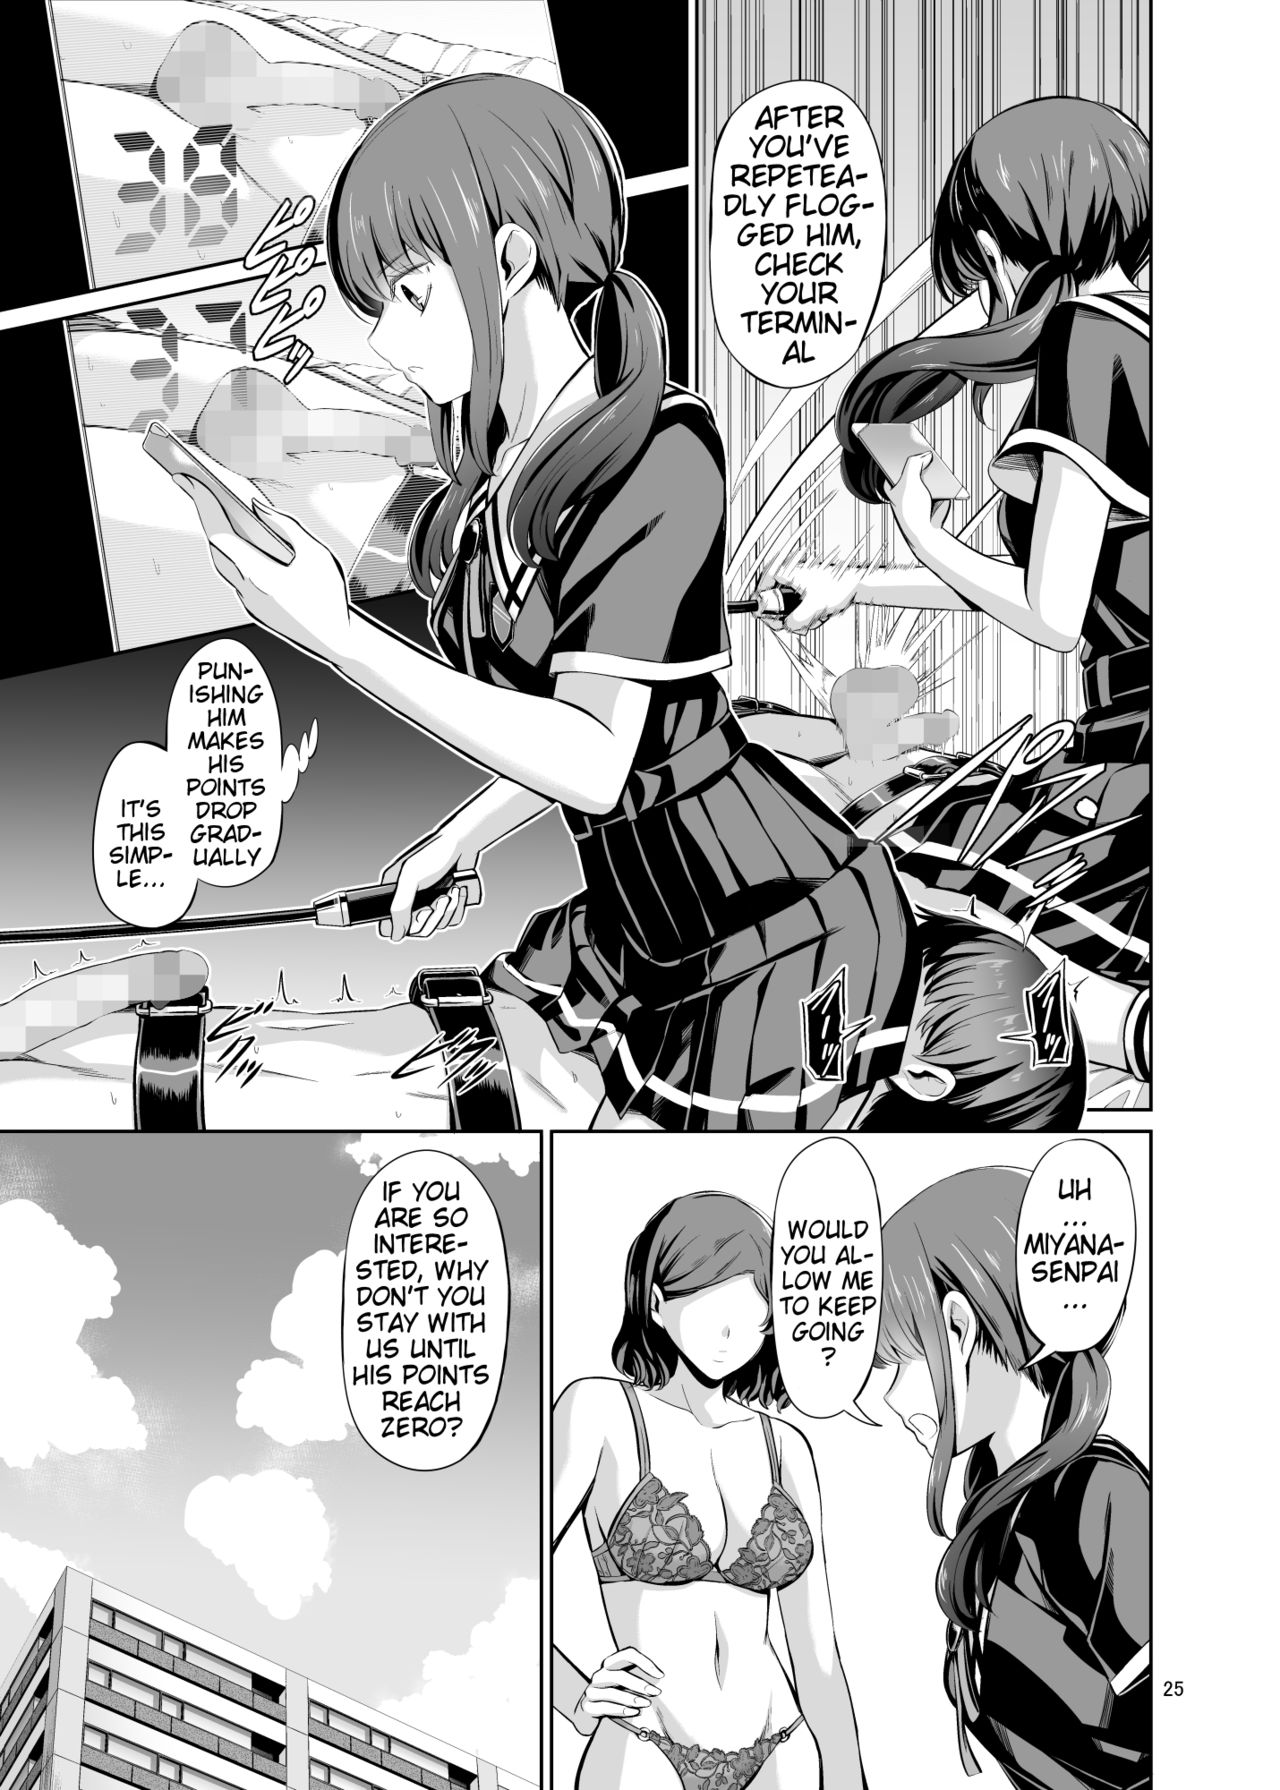 [Yamahata Rian] Tensuushugi no Kuni Kouhen | A Country Based on Point System Sequel [English] [Esoteric_Autist, klow82] page 27 full